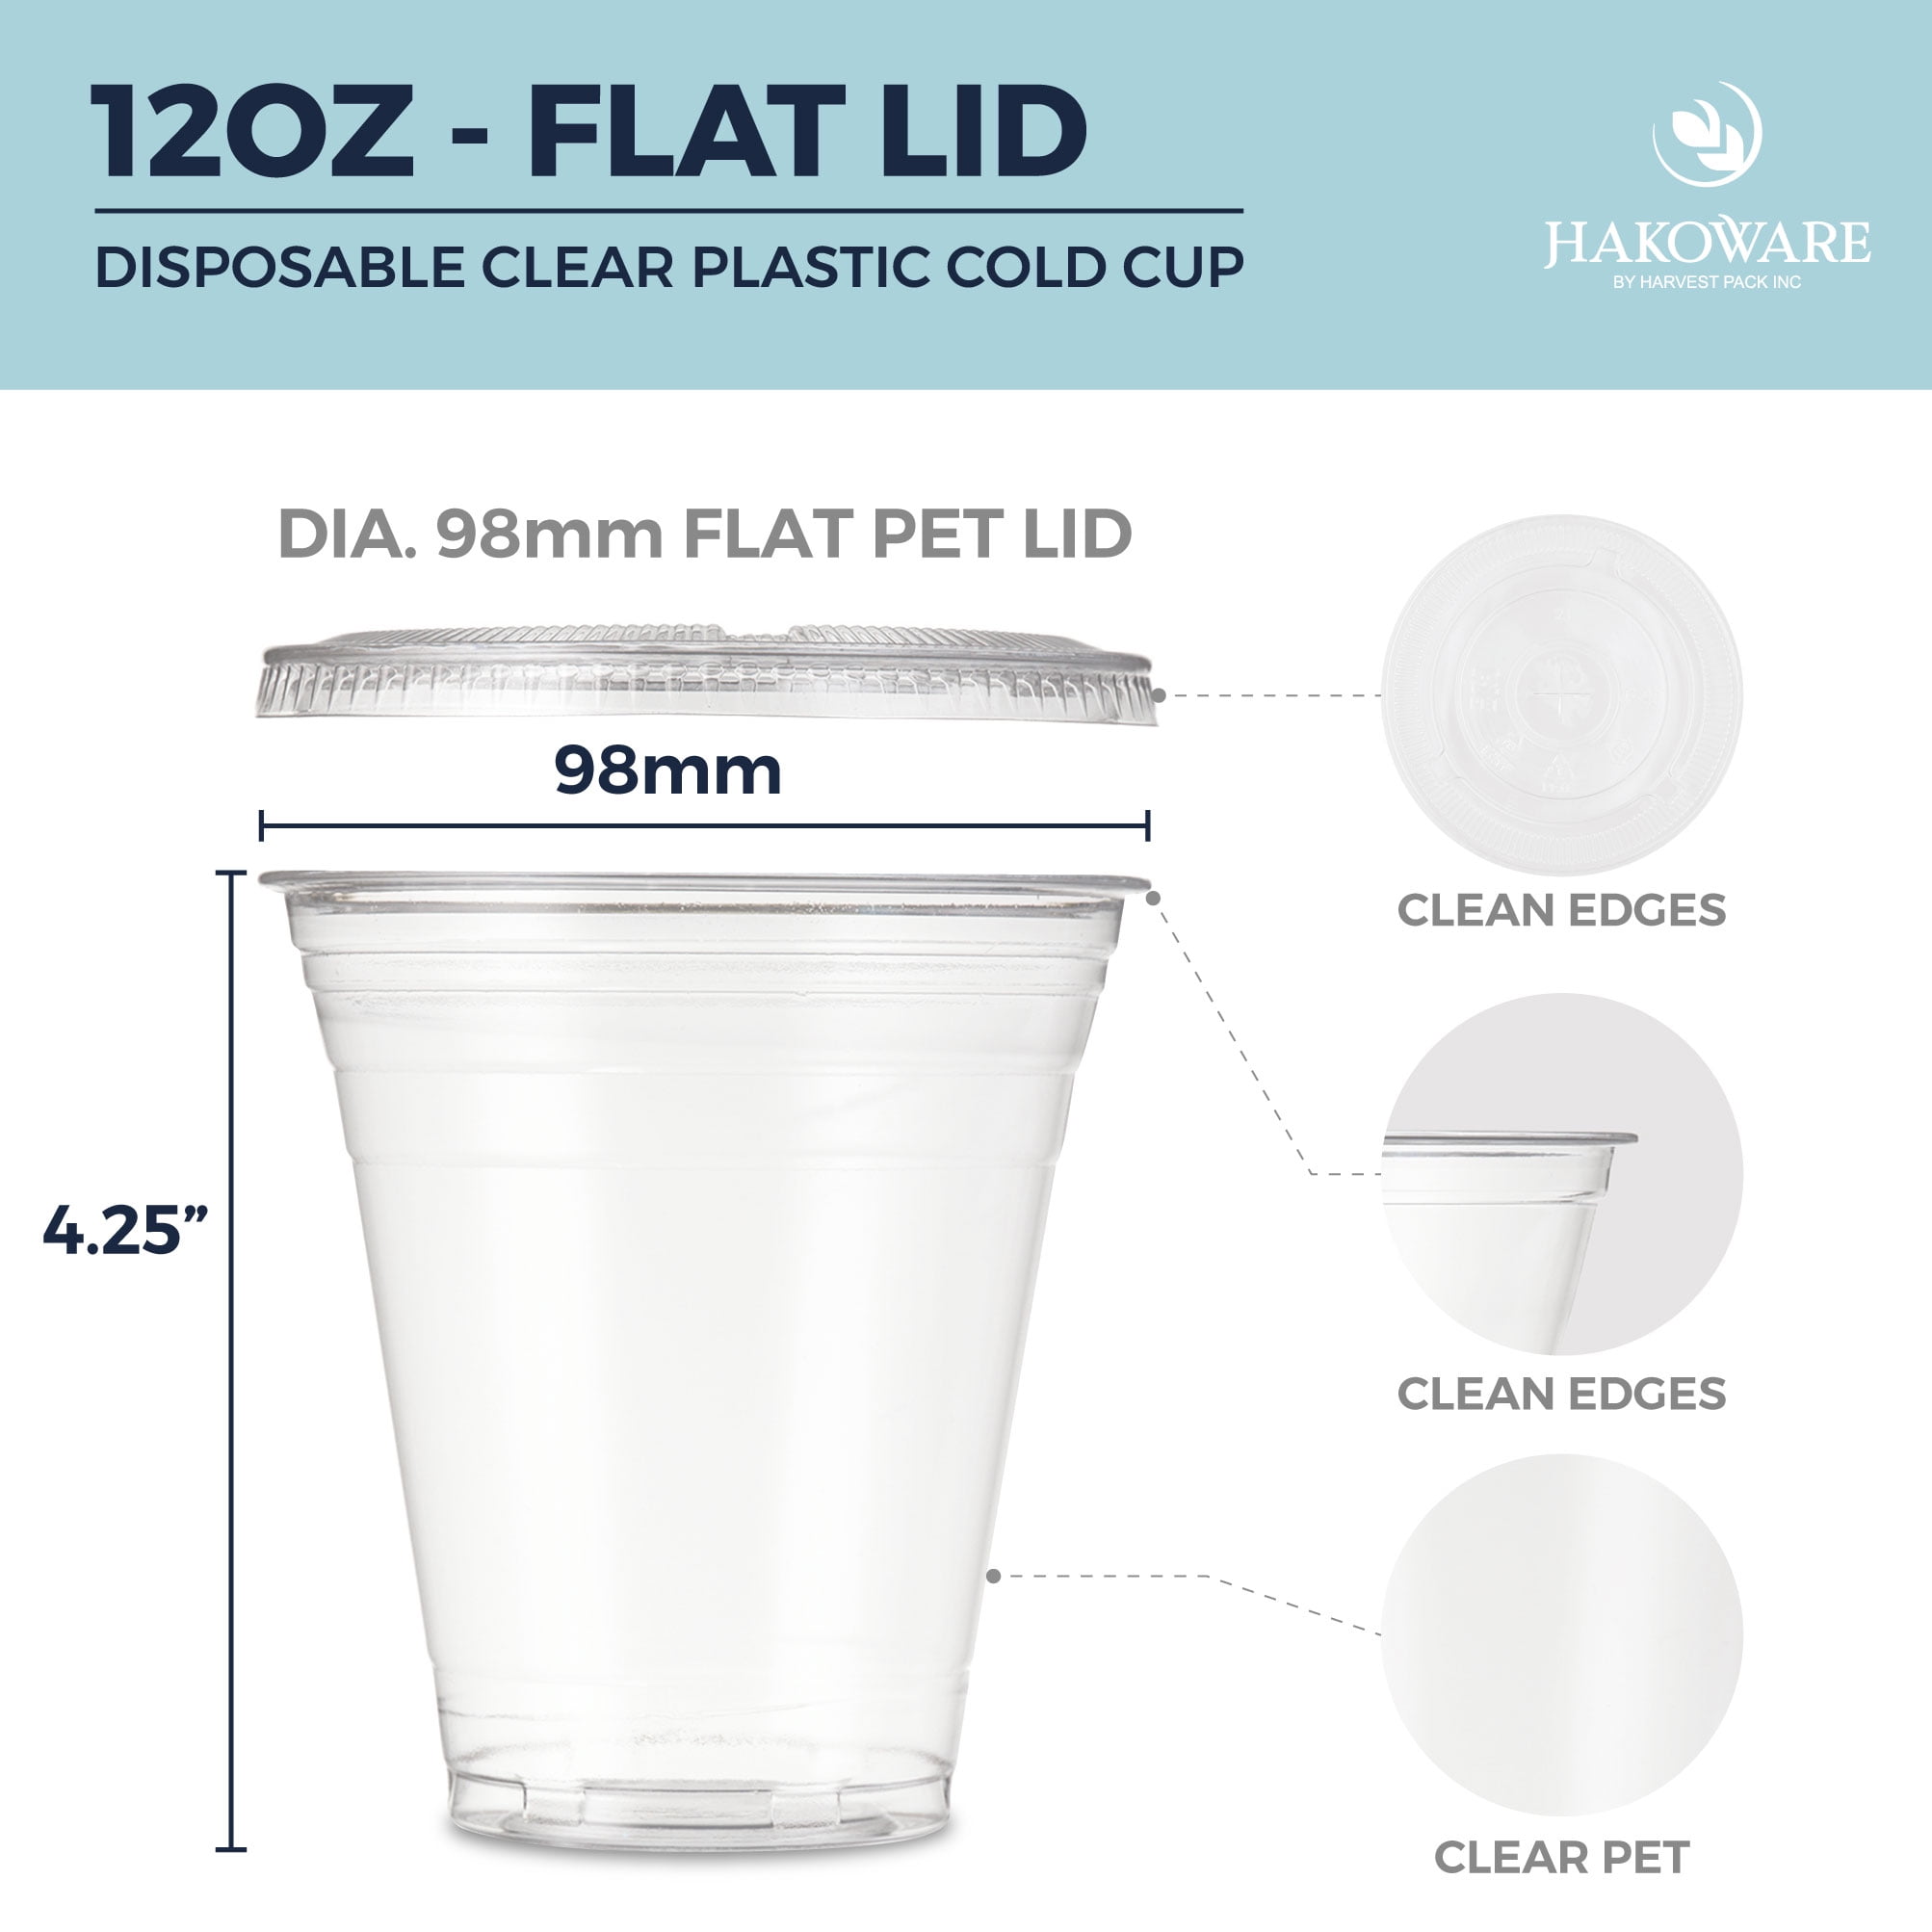 H-E-B 12 oz Clear Plastic To Go Cups with Lids - Shop Drinkware at H-E-B